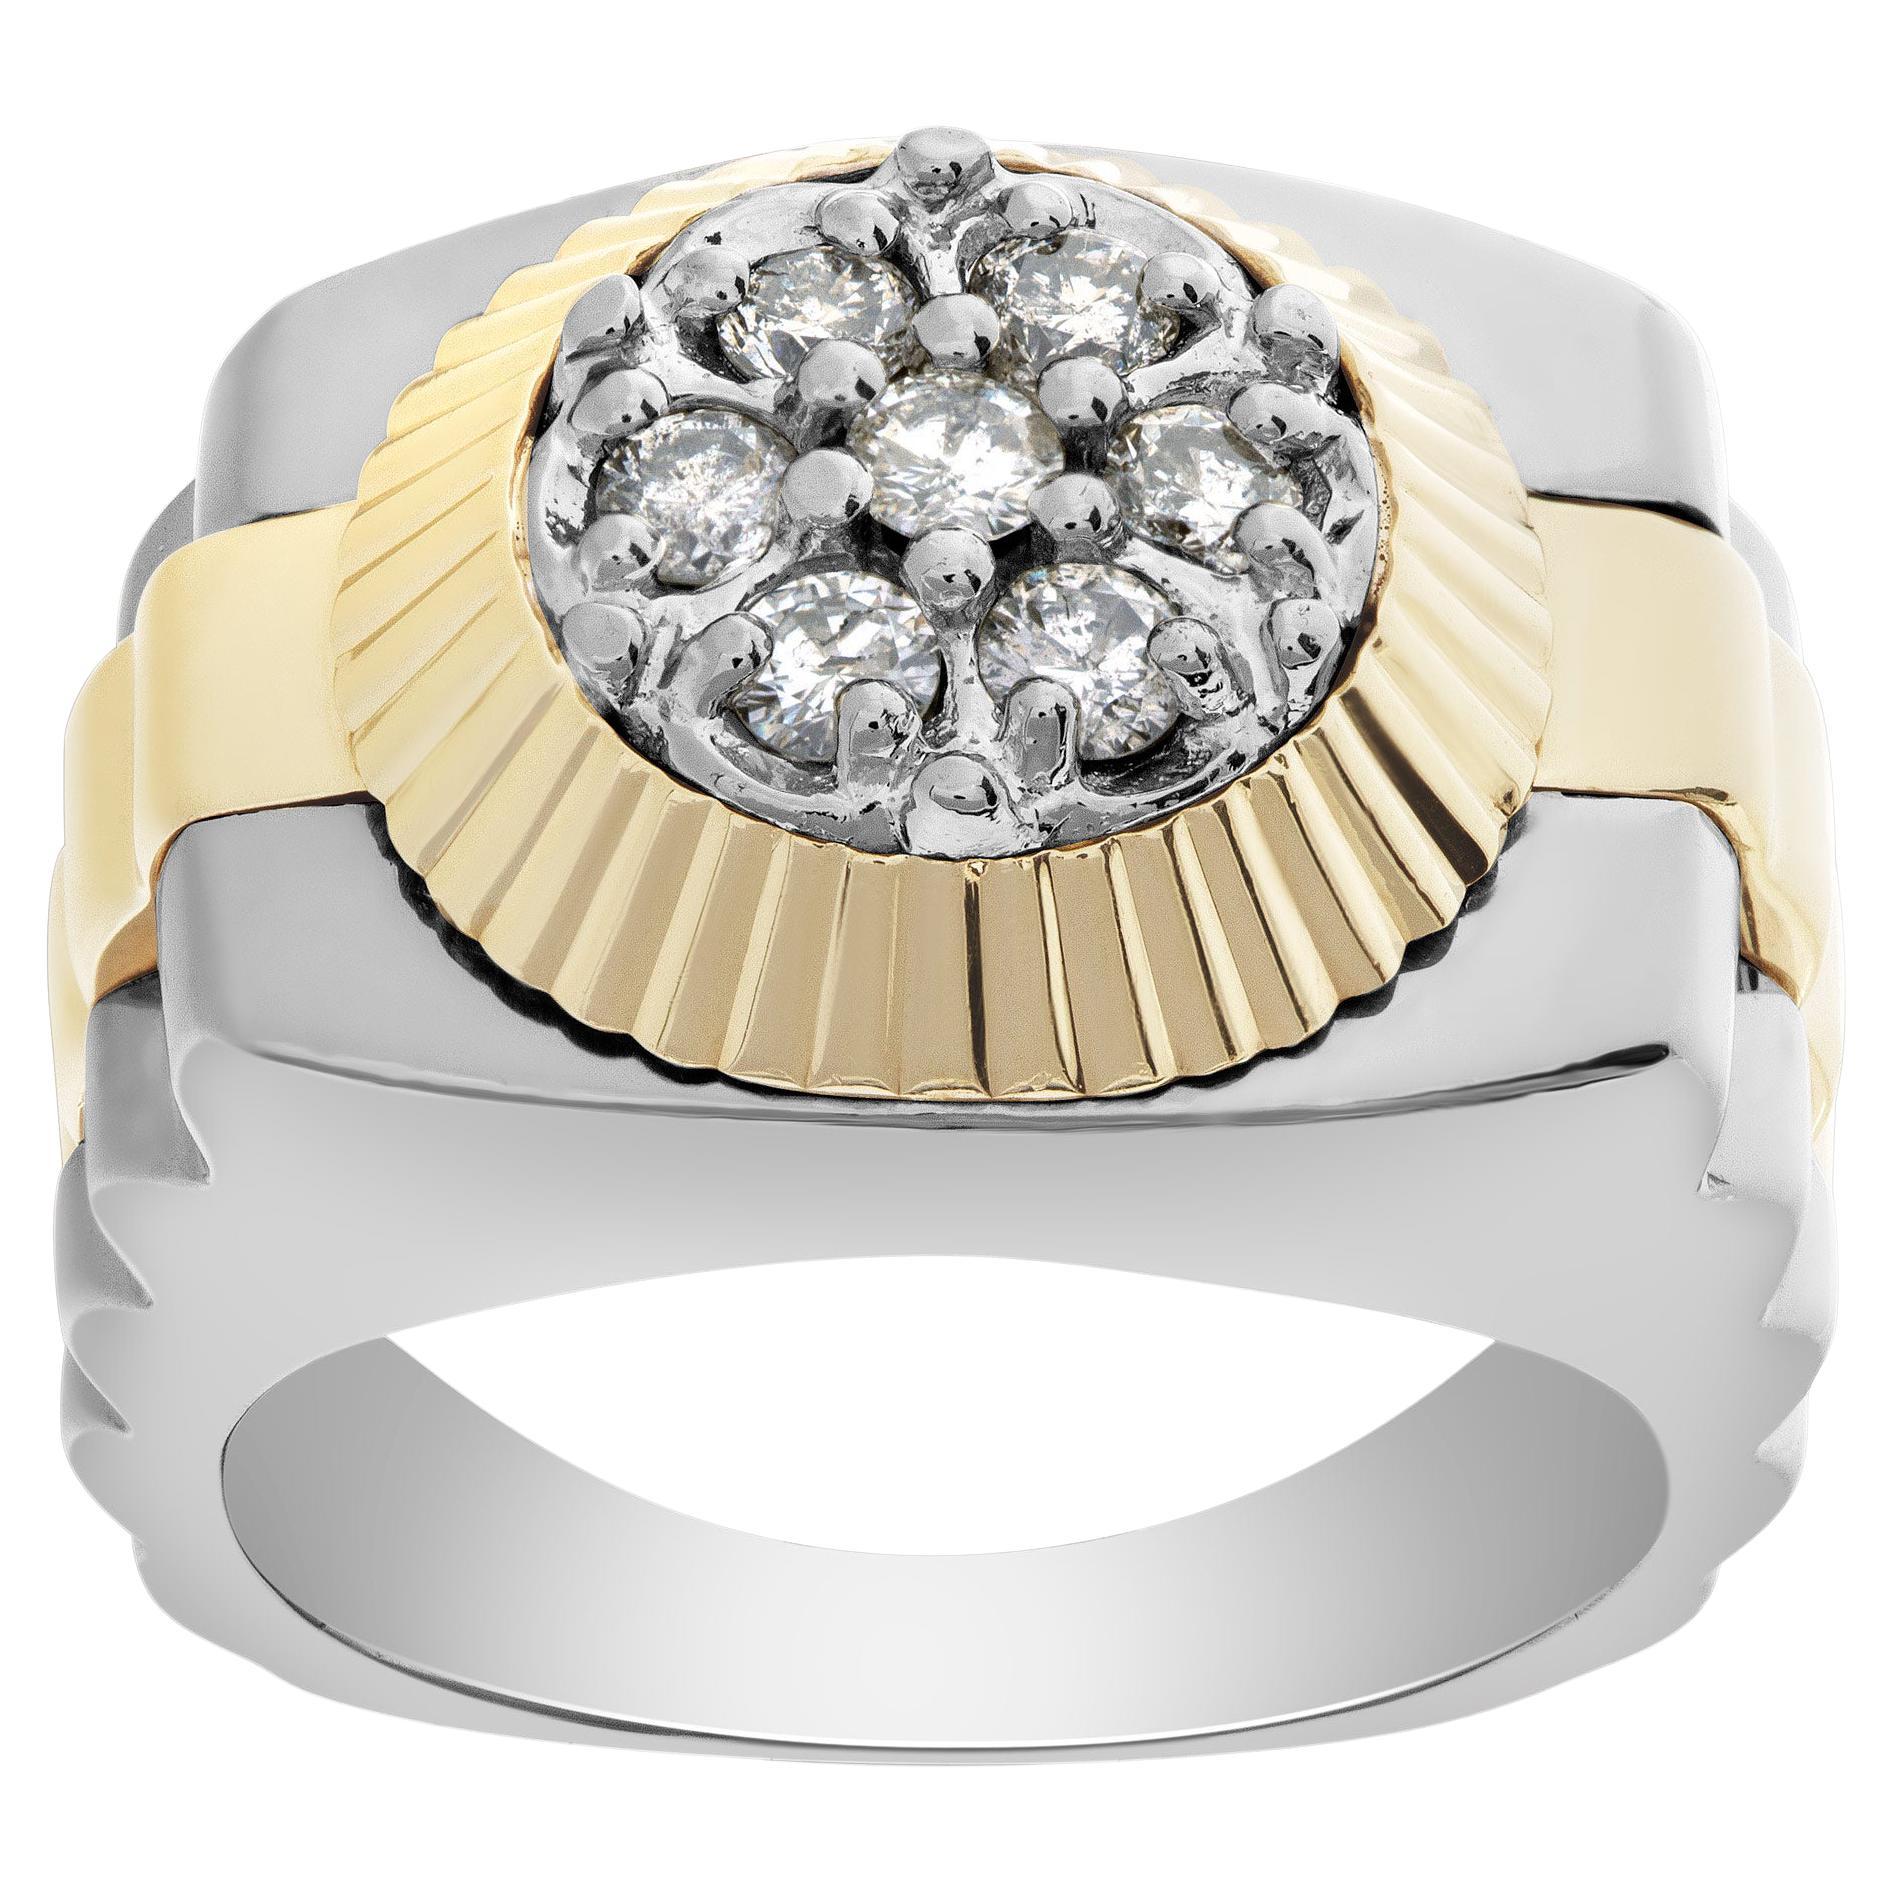 President Style Diamond Ring in 14k White and Yellow Gold